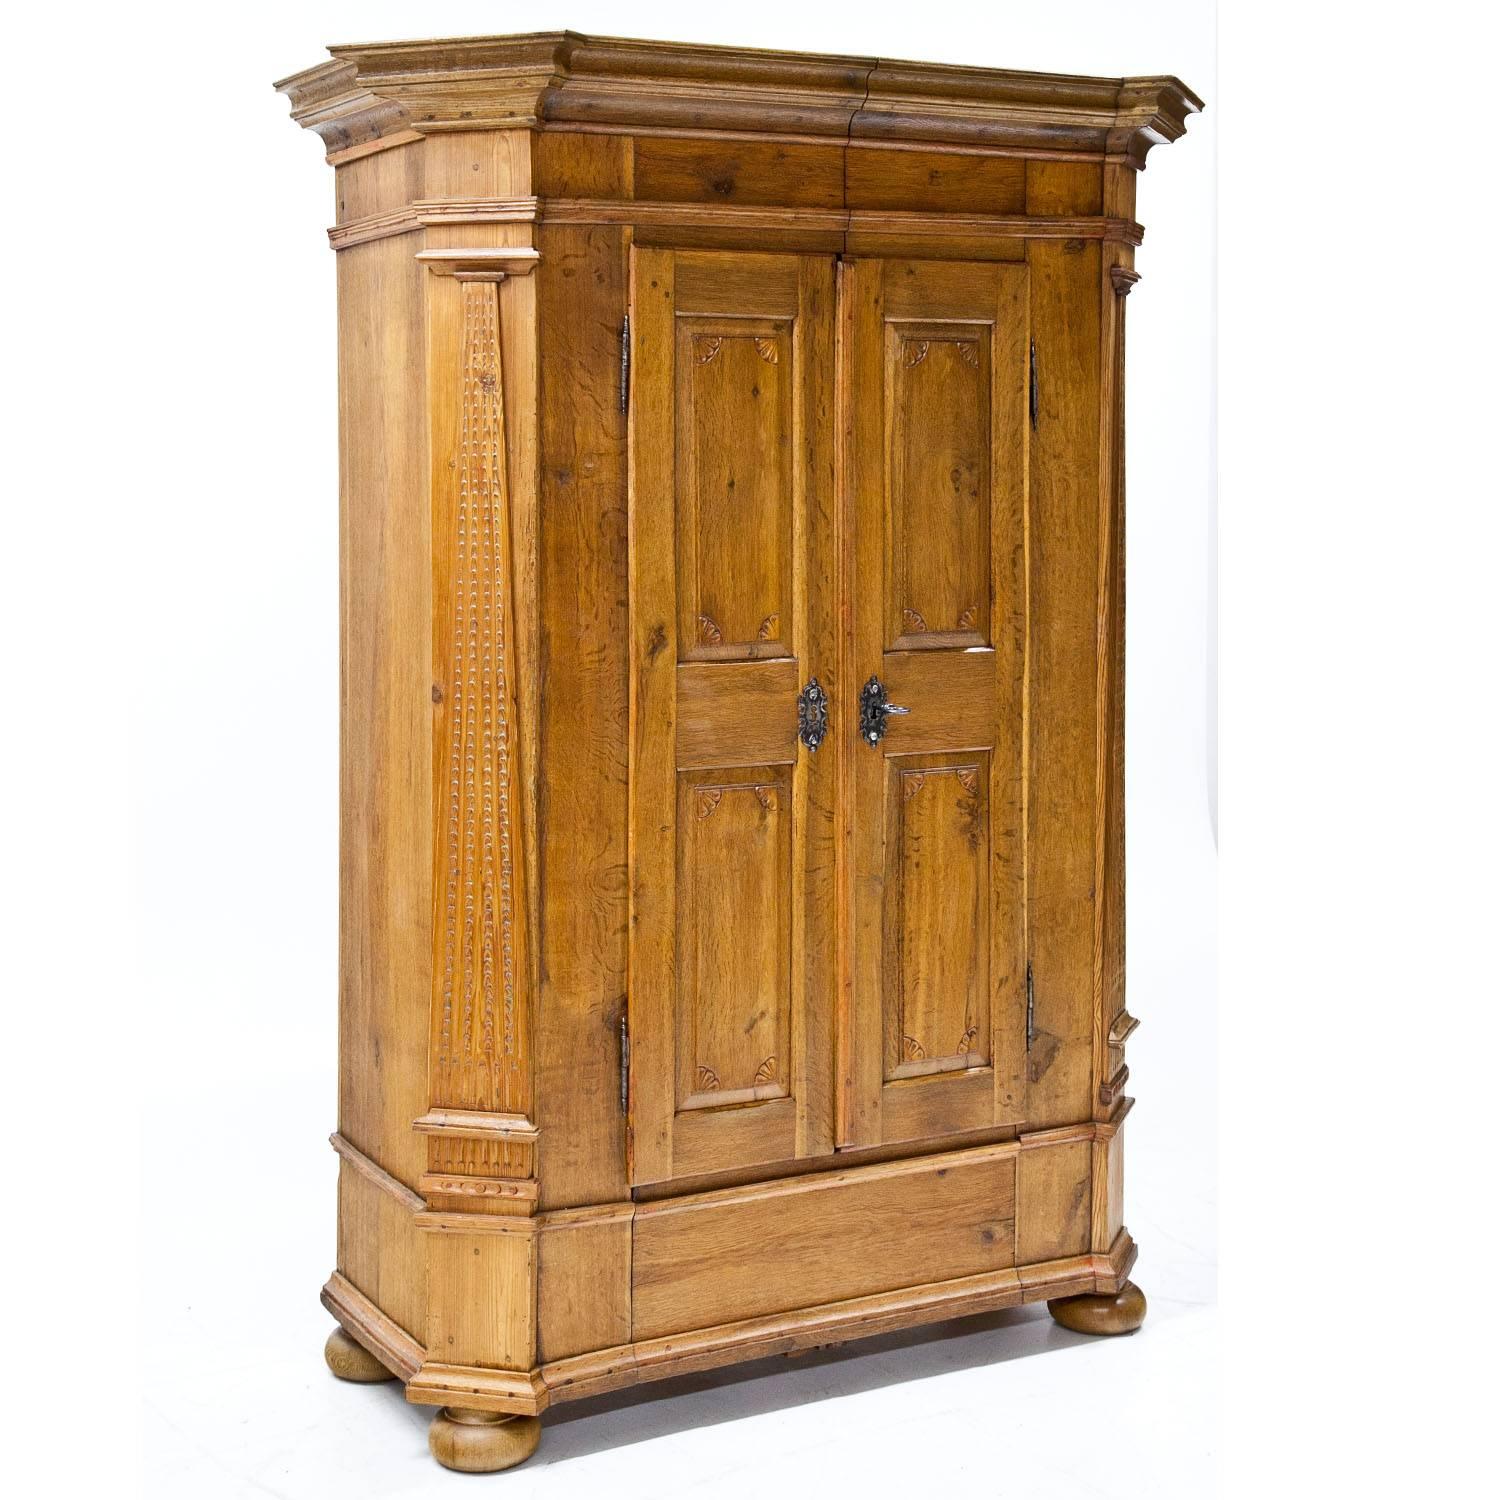 Two-doored cabinet standing on bun feet with slanted corners a profiled cornice and pyramidal pilasters. The doors with fillings and carved shell ornaments in each corner.